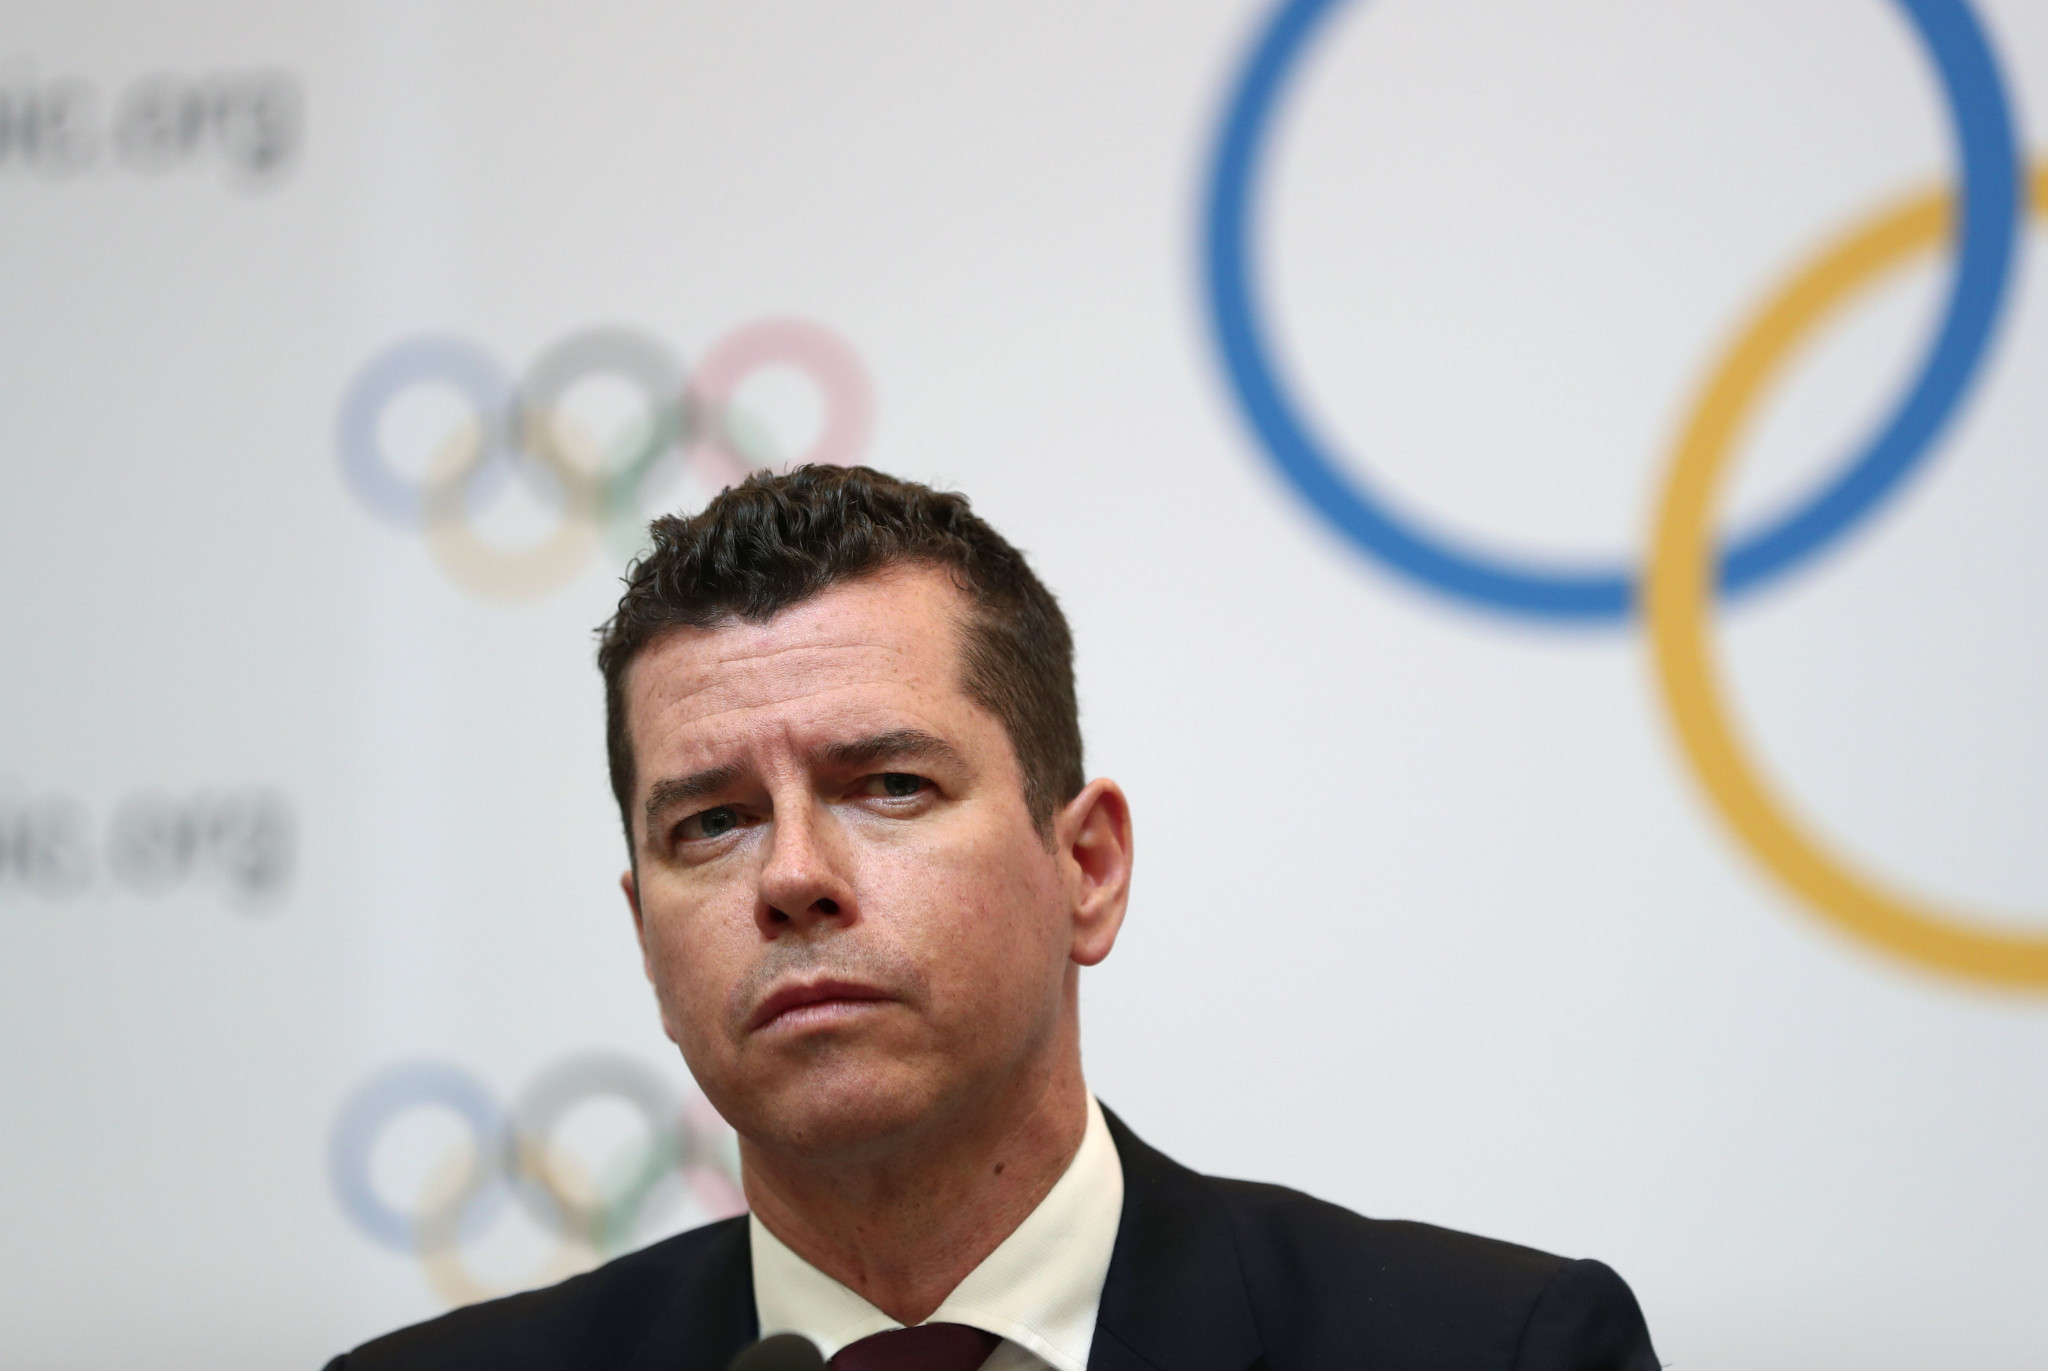 IOC sports director Kit McConnell outlined the next steps for AIBA and the Olympic boxing tournament at Tokyo 2020 following the meeting identified several areas of concern with the world governing body ©Getty Images